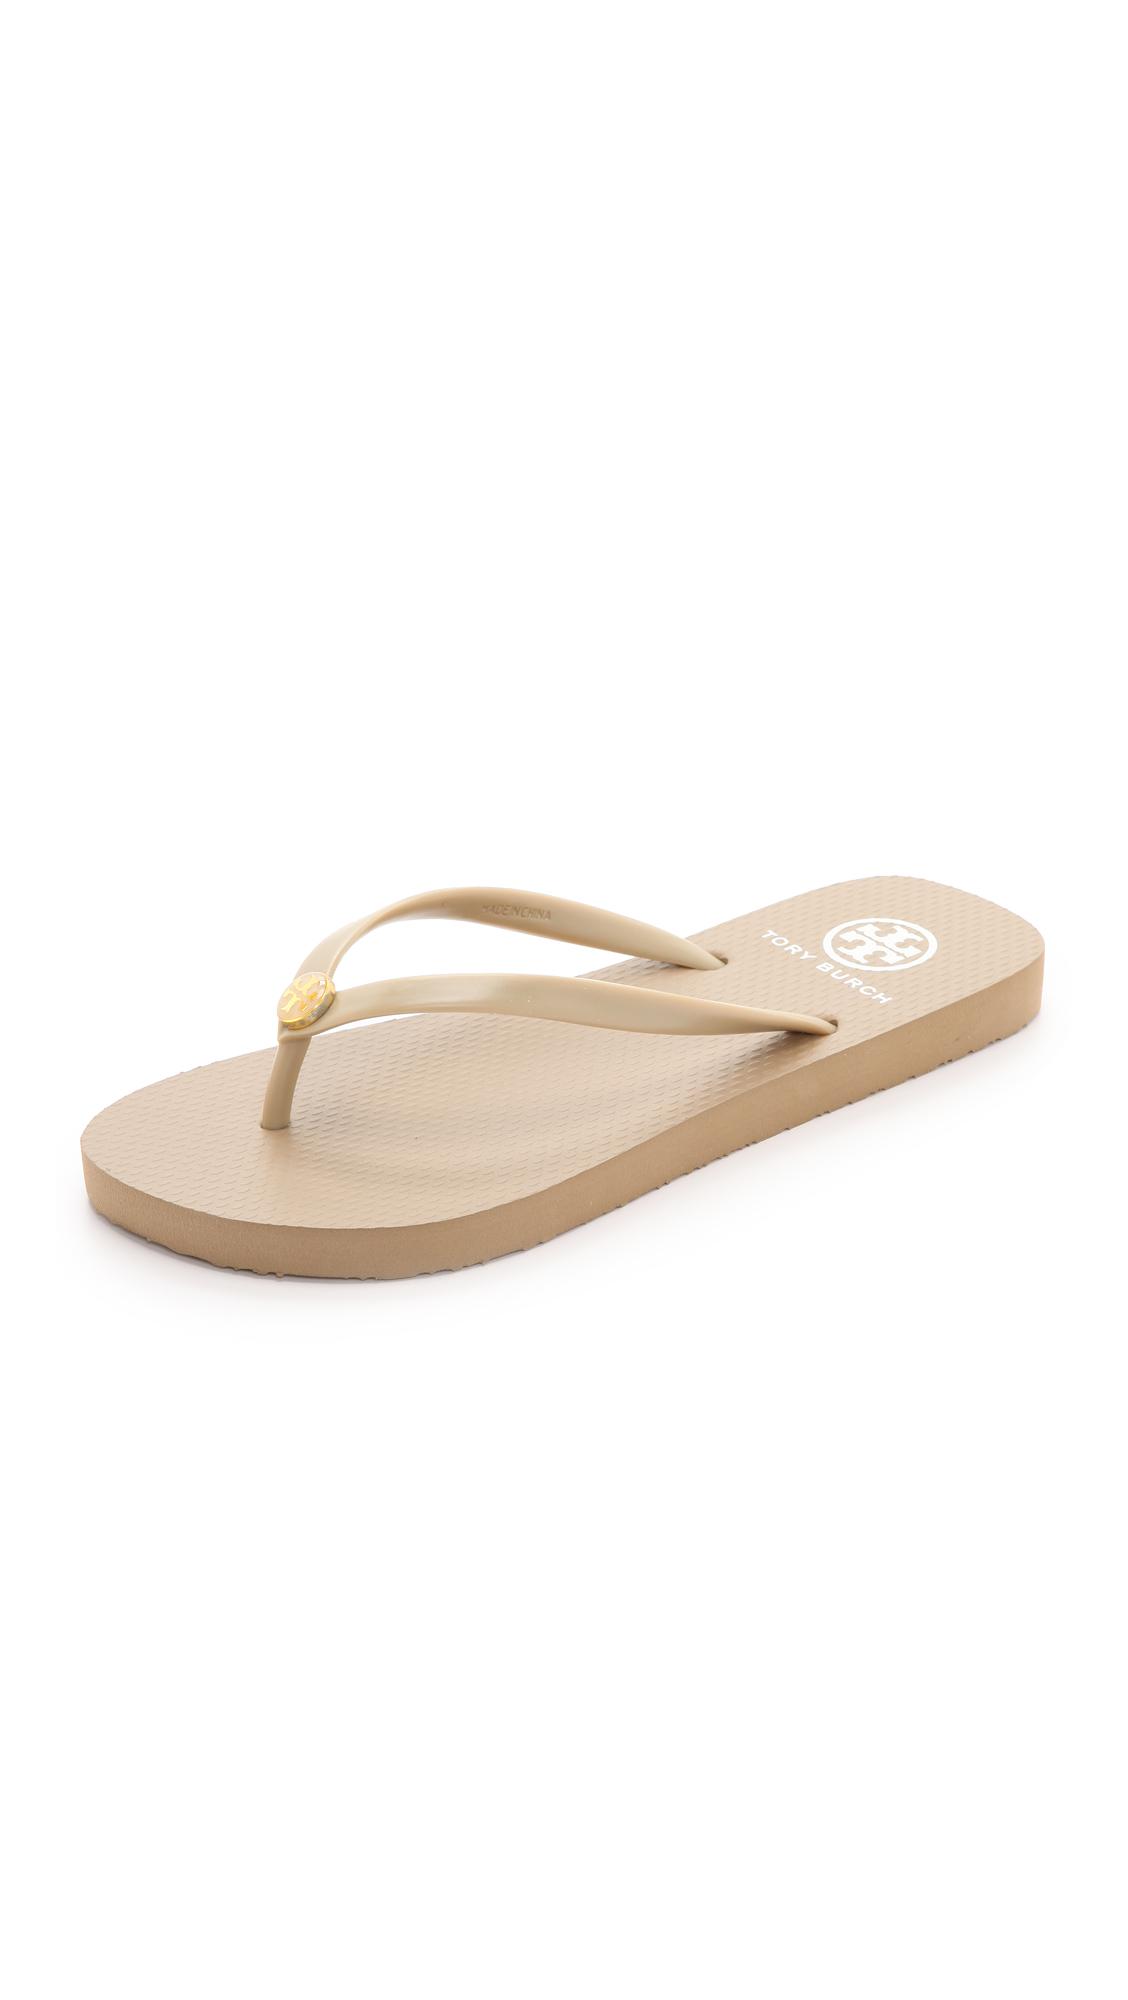 Lyst - Tory Burch Thin Flip Flops in Natural